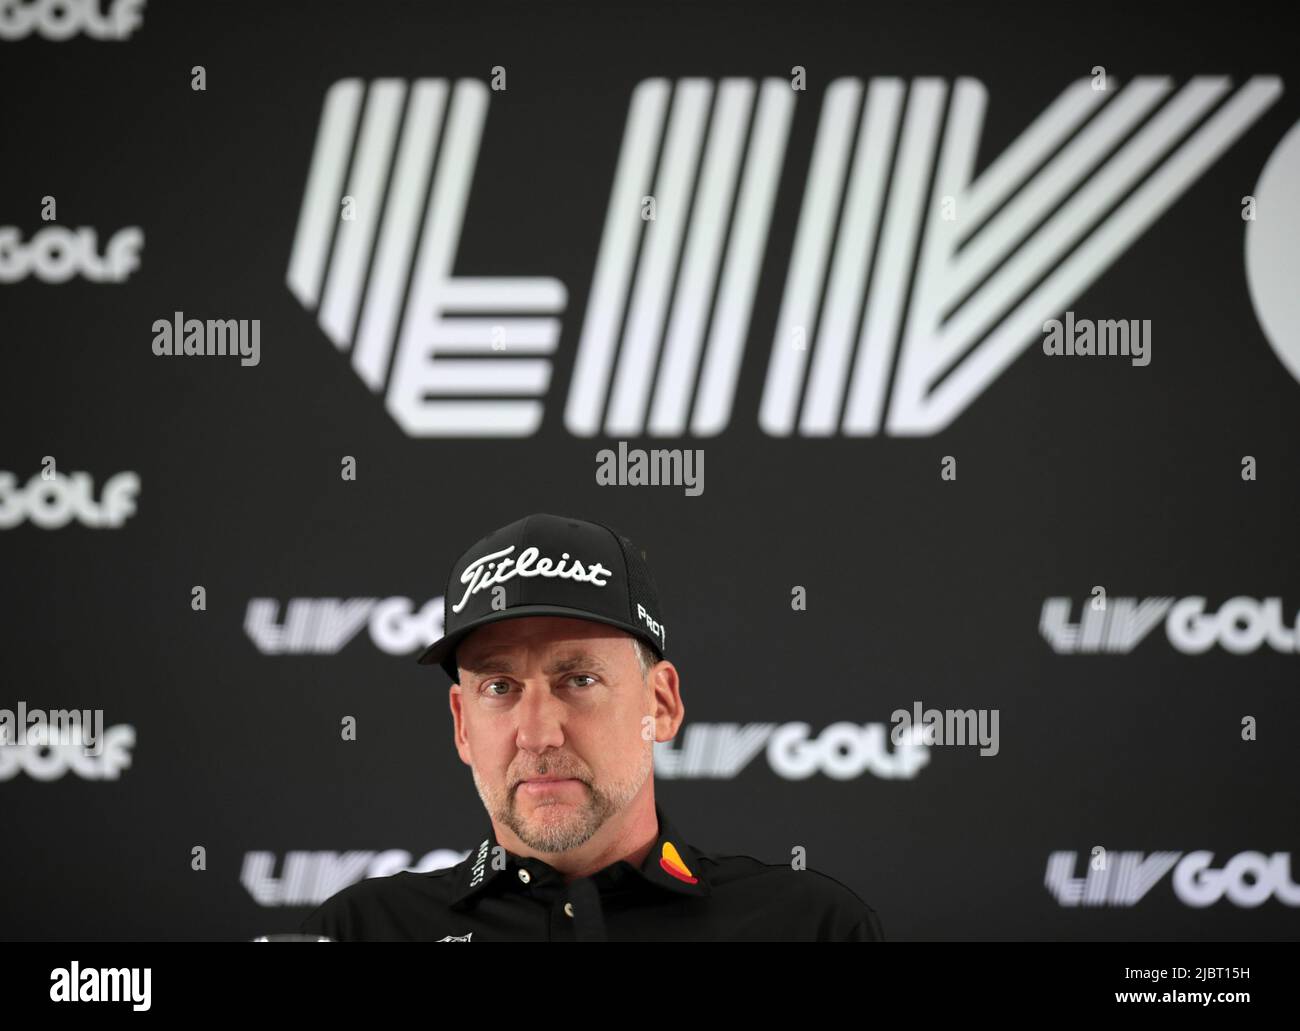 London, UK. 08th June, 2022. England's Ian Poulter answers questions from the media at a press conference for the inaugural LIV Golf event at the Centurion club in Hertfordshire on Wednesday, June 08, 2022.The event is controversial due to golfer's such as Dustin Johnson leaving the PGA tour to take part and because it is funded by Saudi Arabian money. Photo by Hugo Philpott/UPI Credit: UPI/Alamy Live News Stock Photo